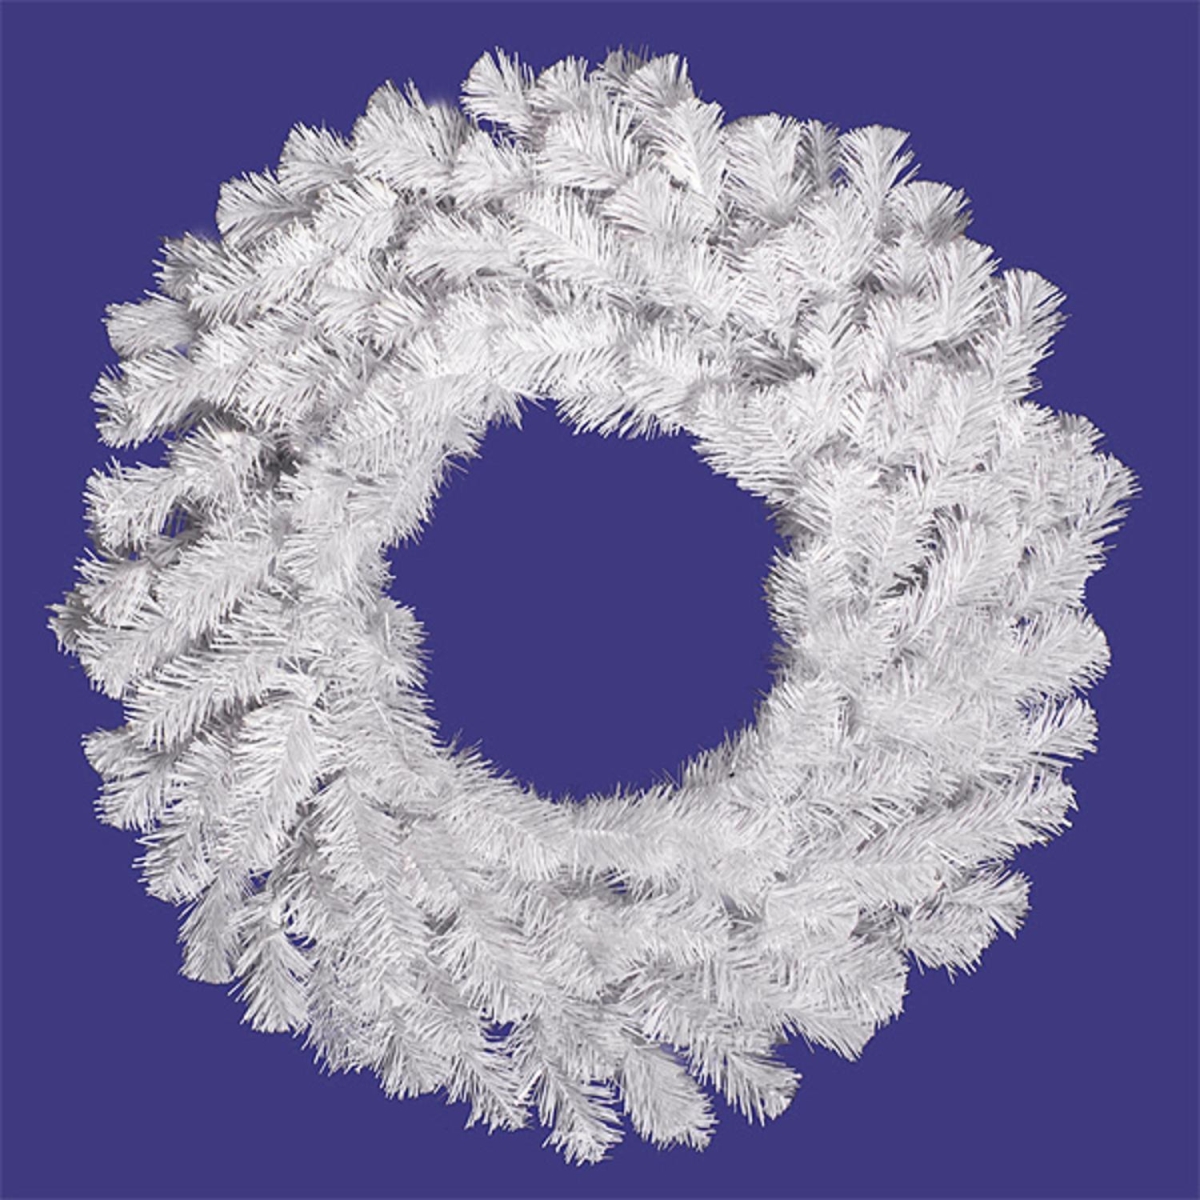 32913186 48 In. Snow Artificial Pine Christmas Wreath - Unlit, White